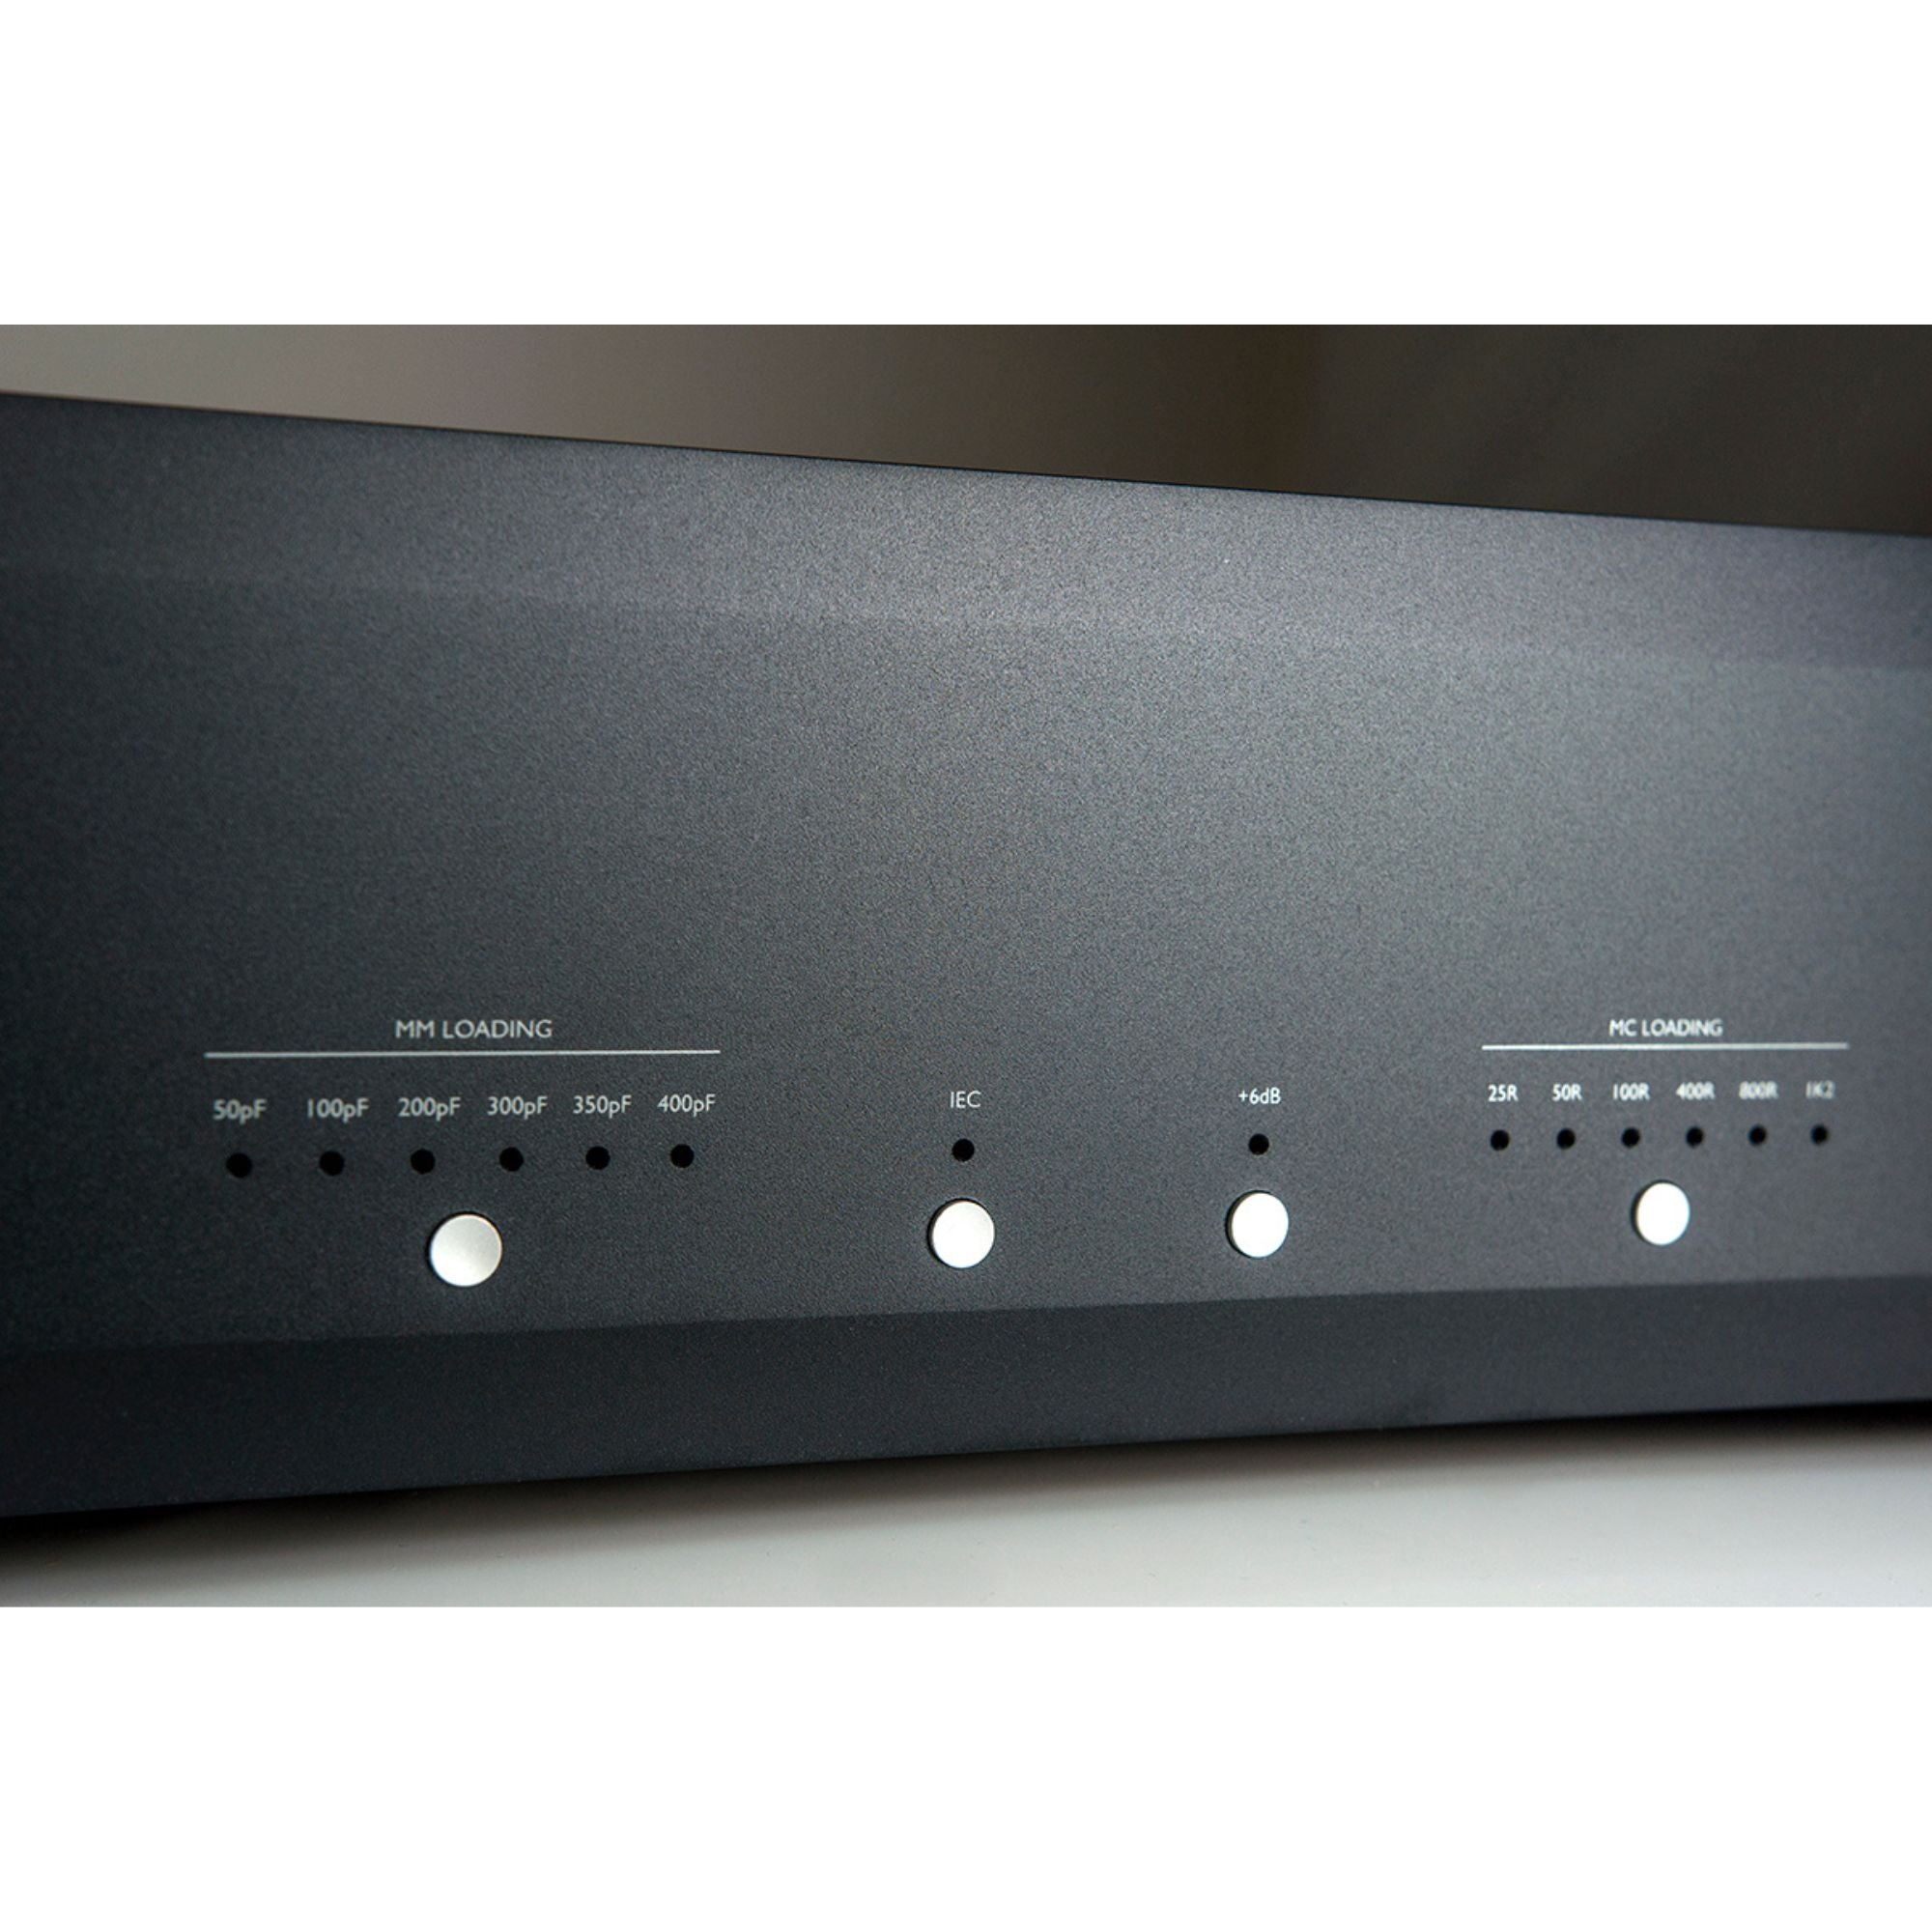 Musical Fidelity M6X Vinyl - Phono stage, Musical Fidelity, Phono Stage - AVStore.in